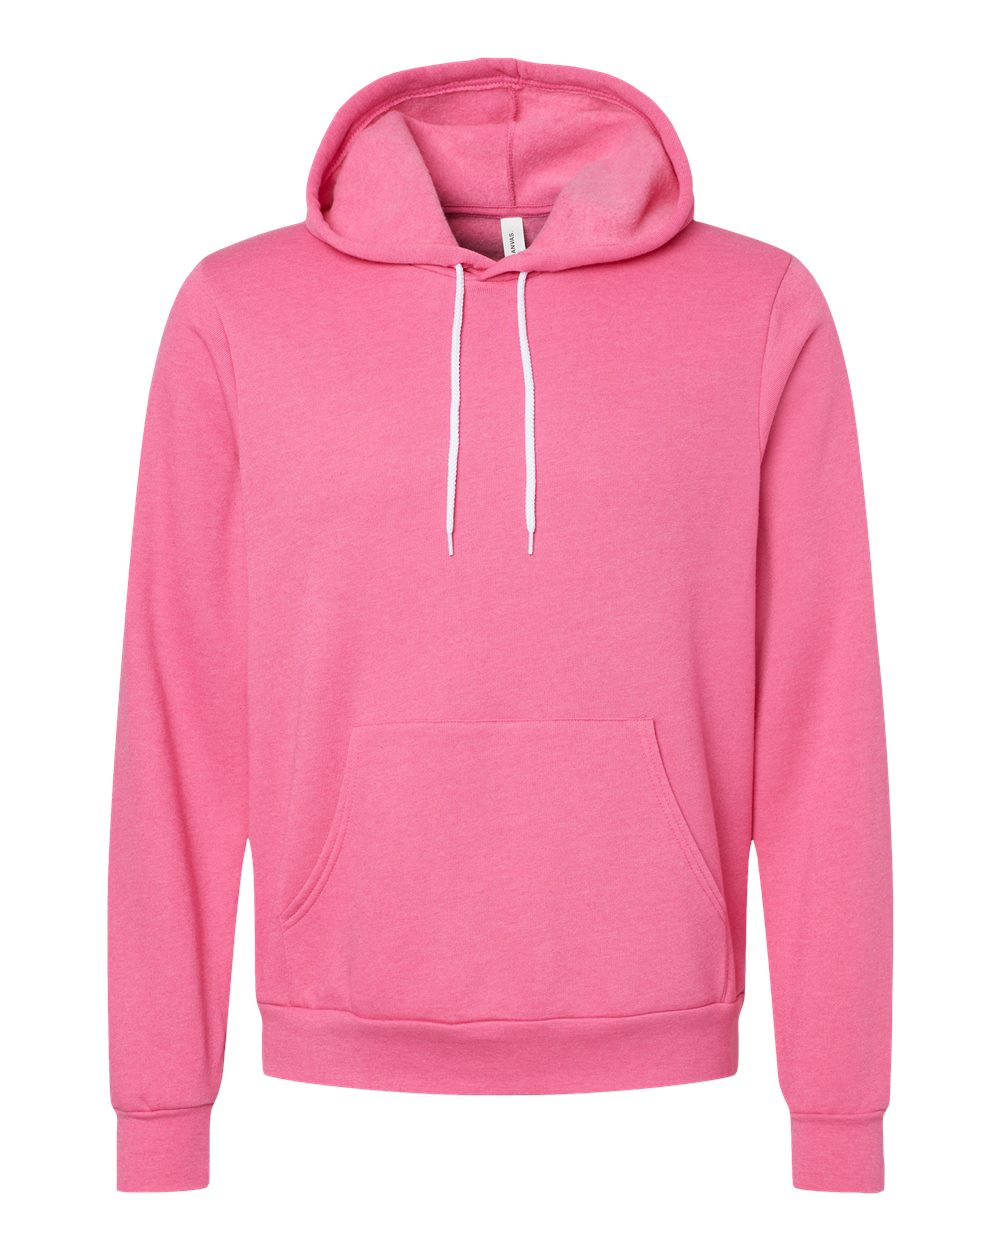 Bella + Canvas Hoodie (3719) in Heather Charity Pink